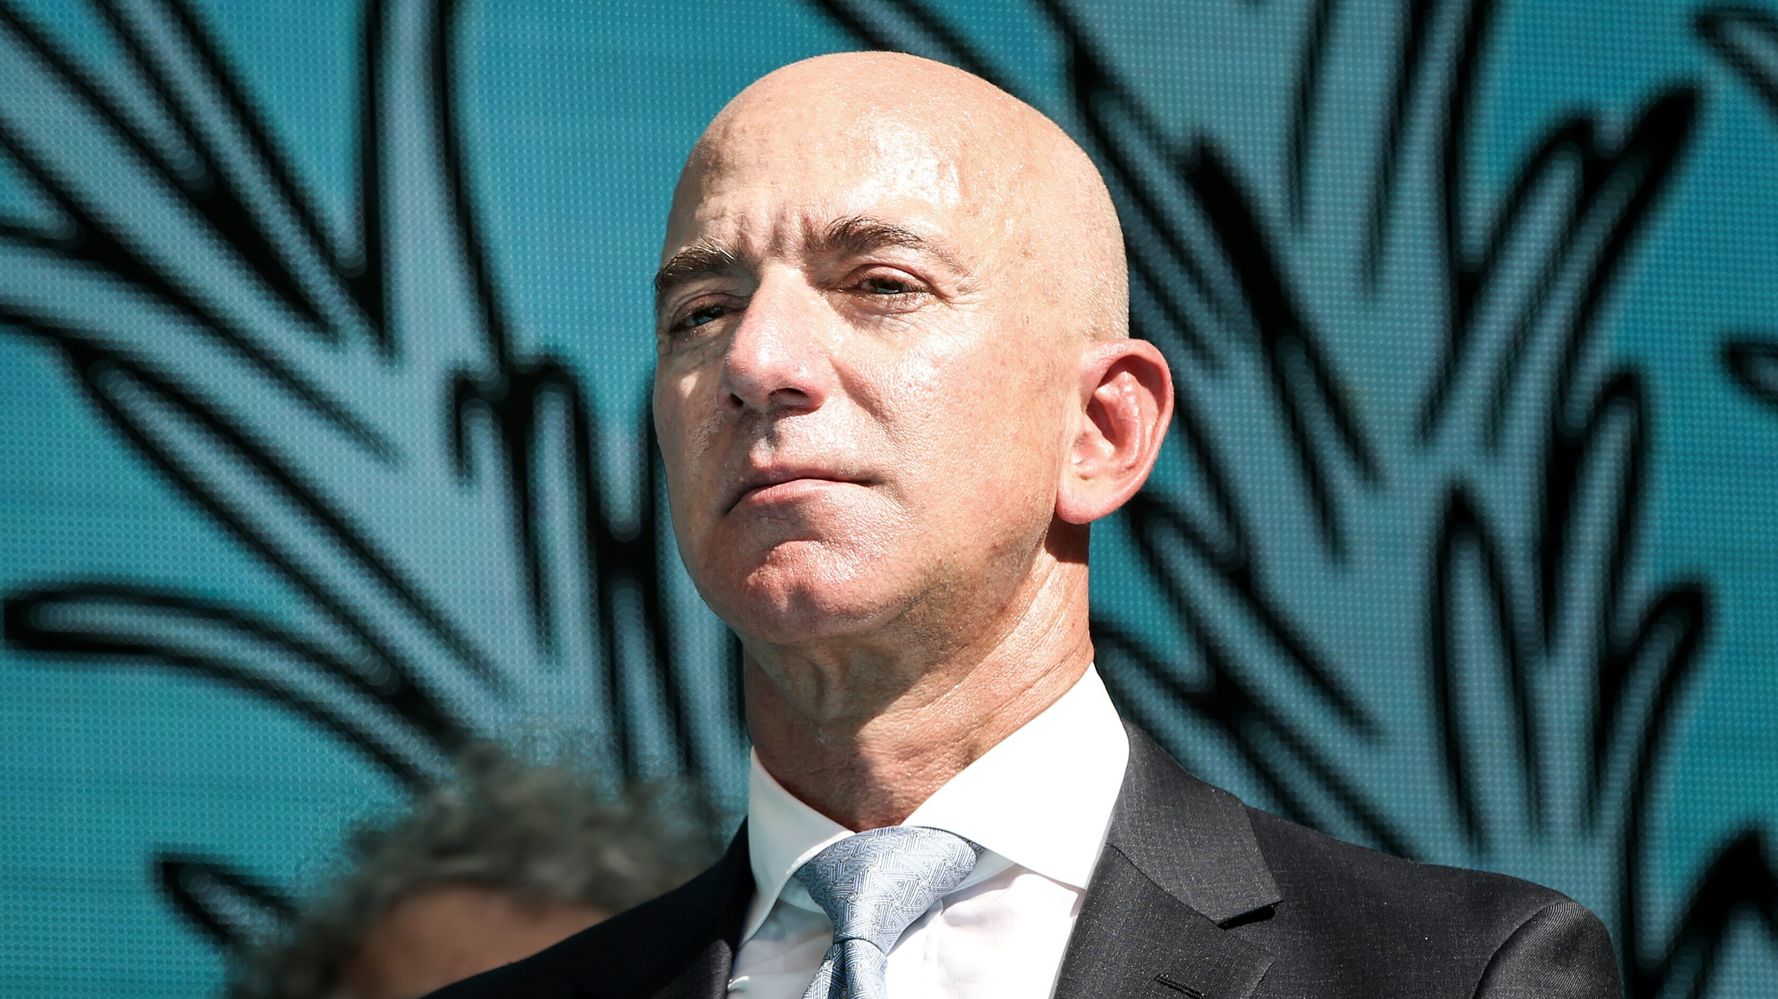 Jeff Bezos endorses higher corporate taxes for infrastructure